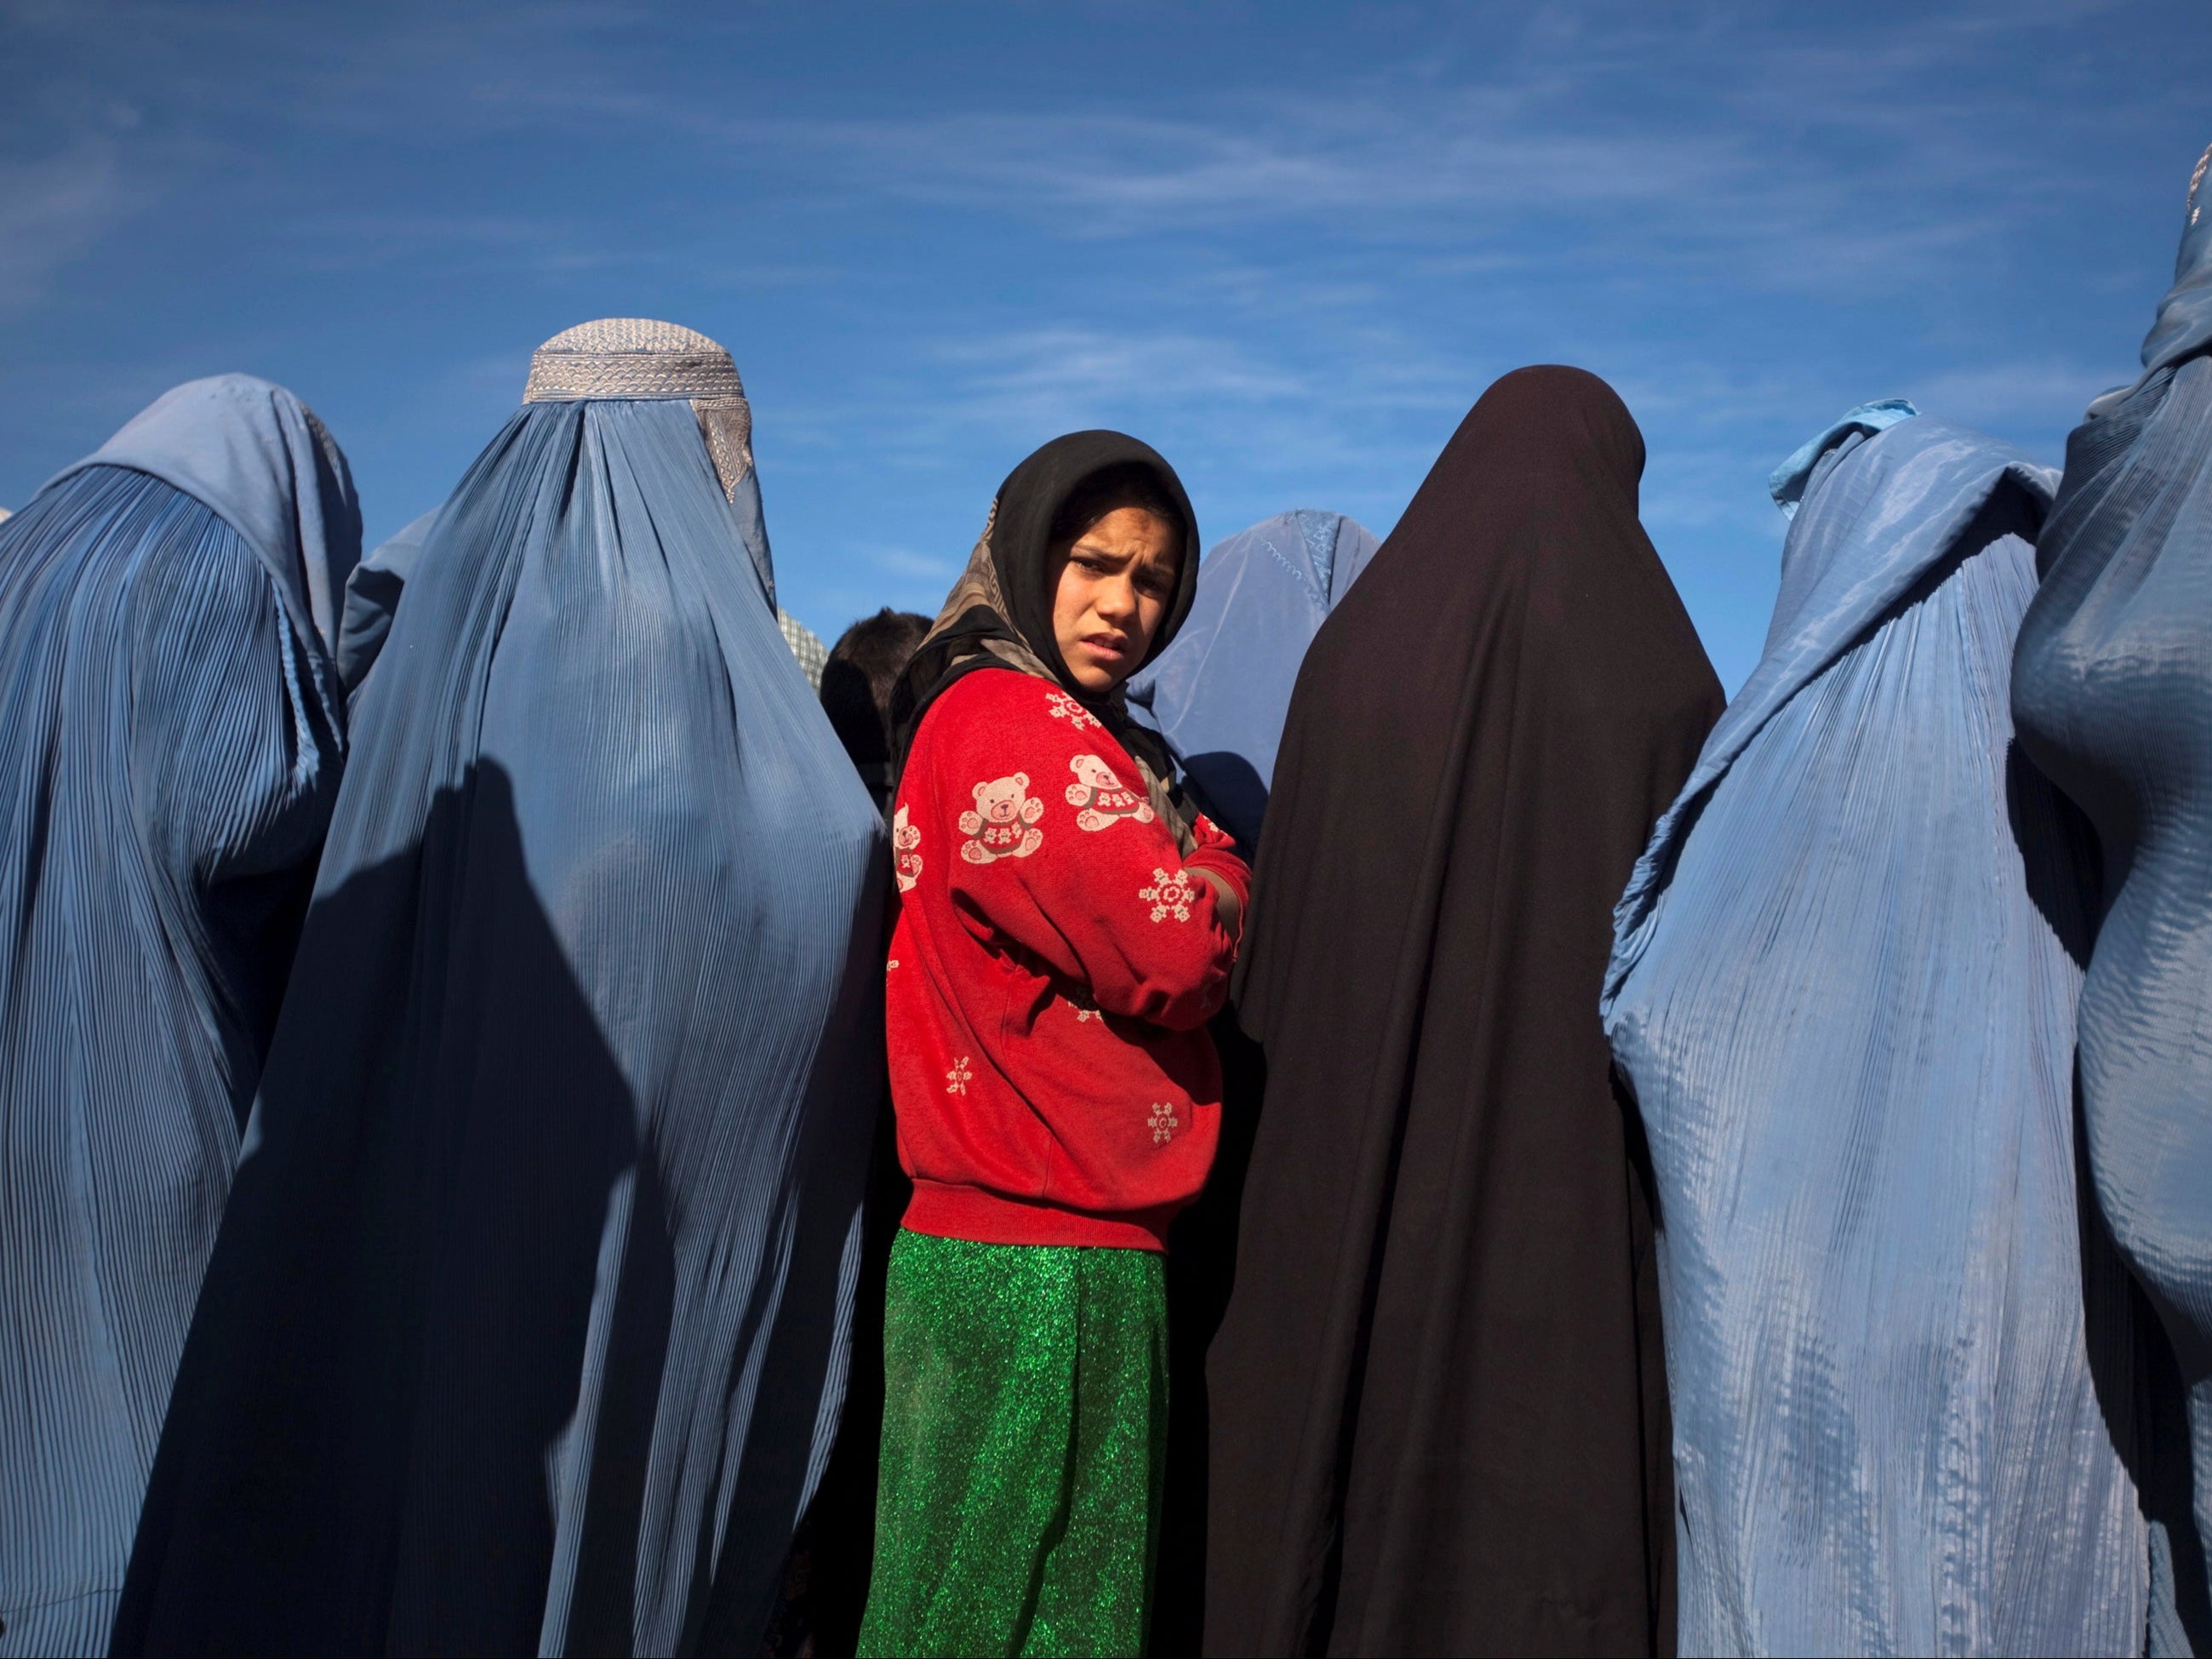 An Afghan girl stands among widows clad in burqas